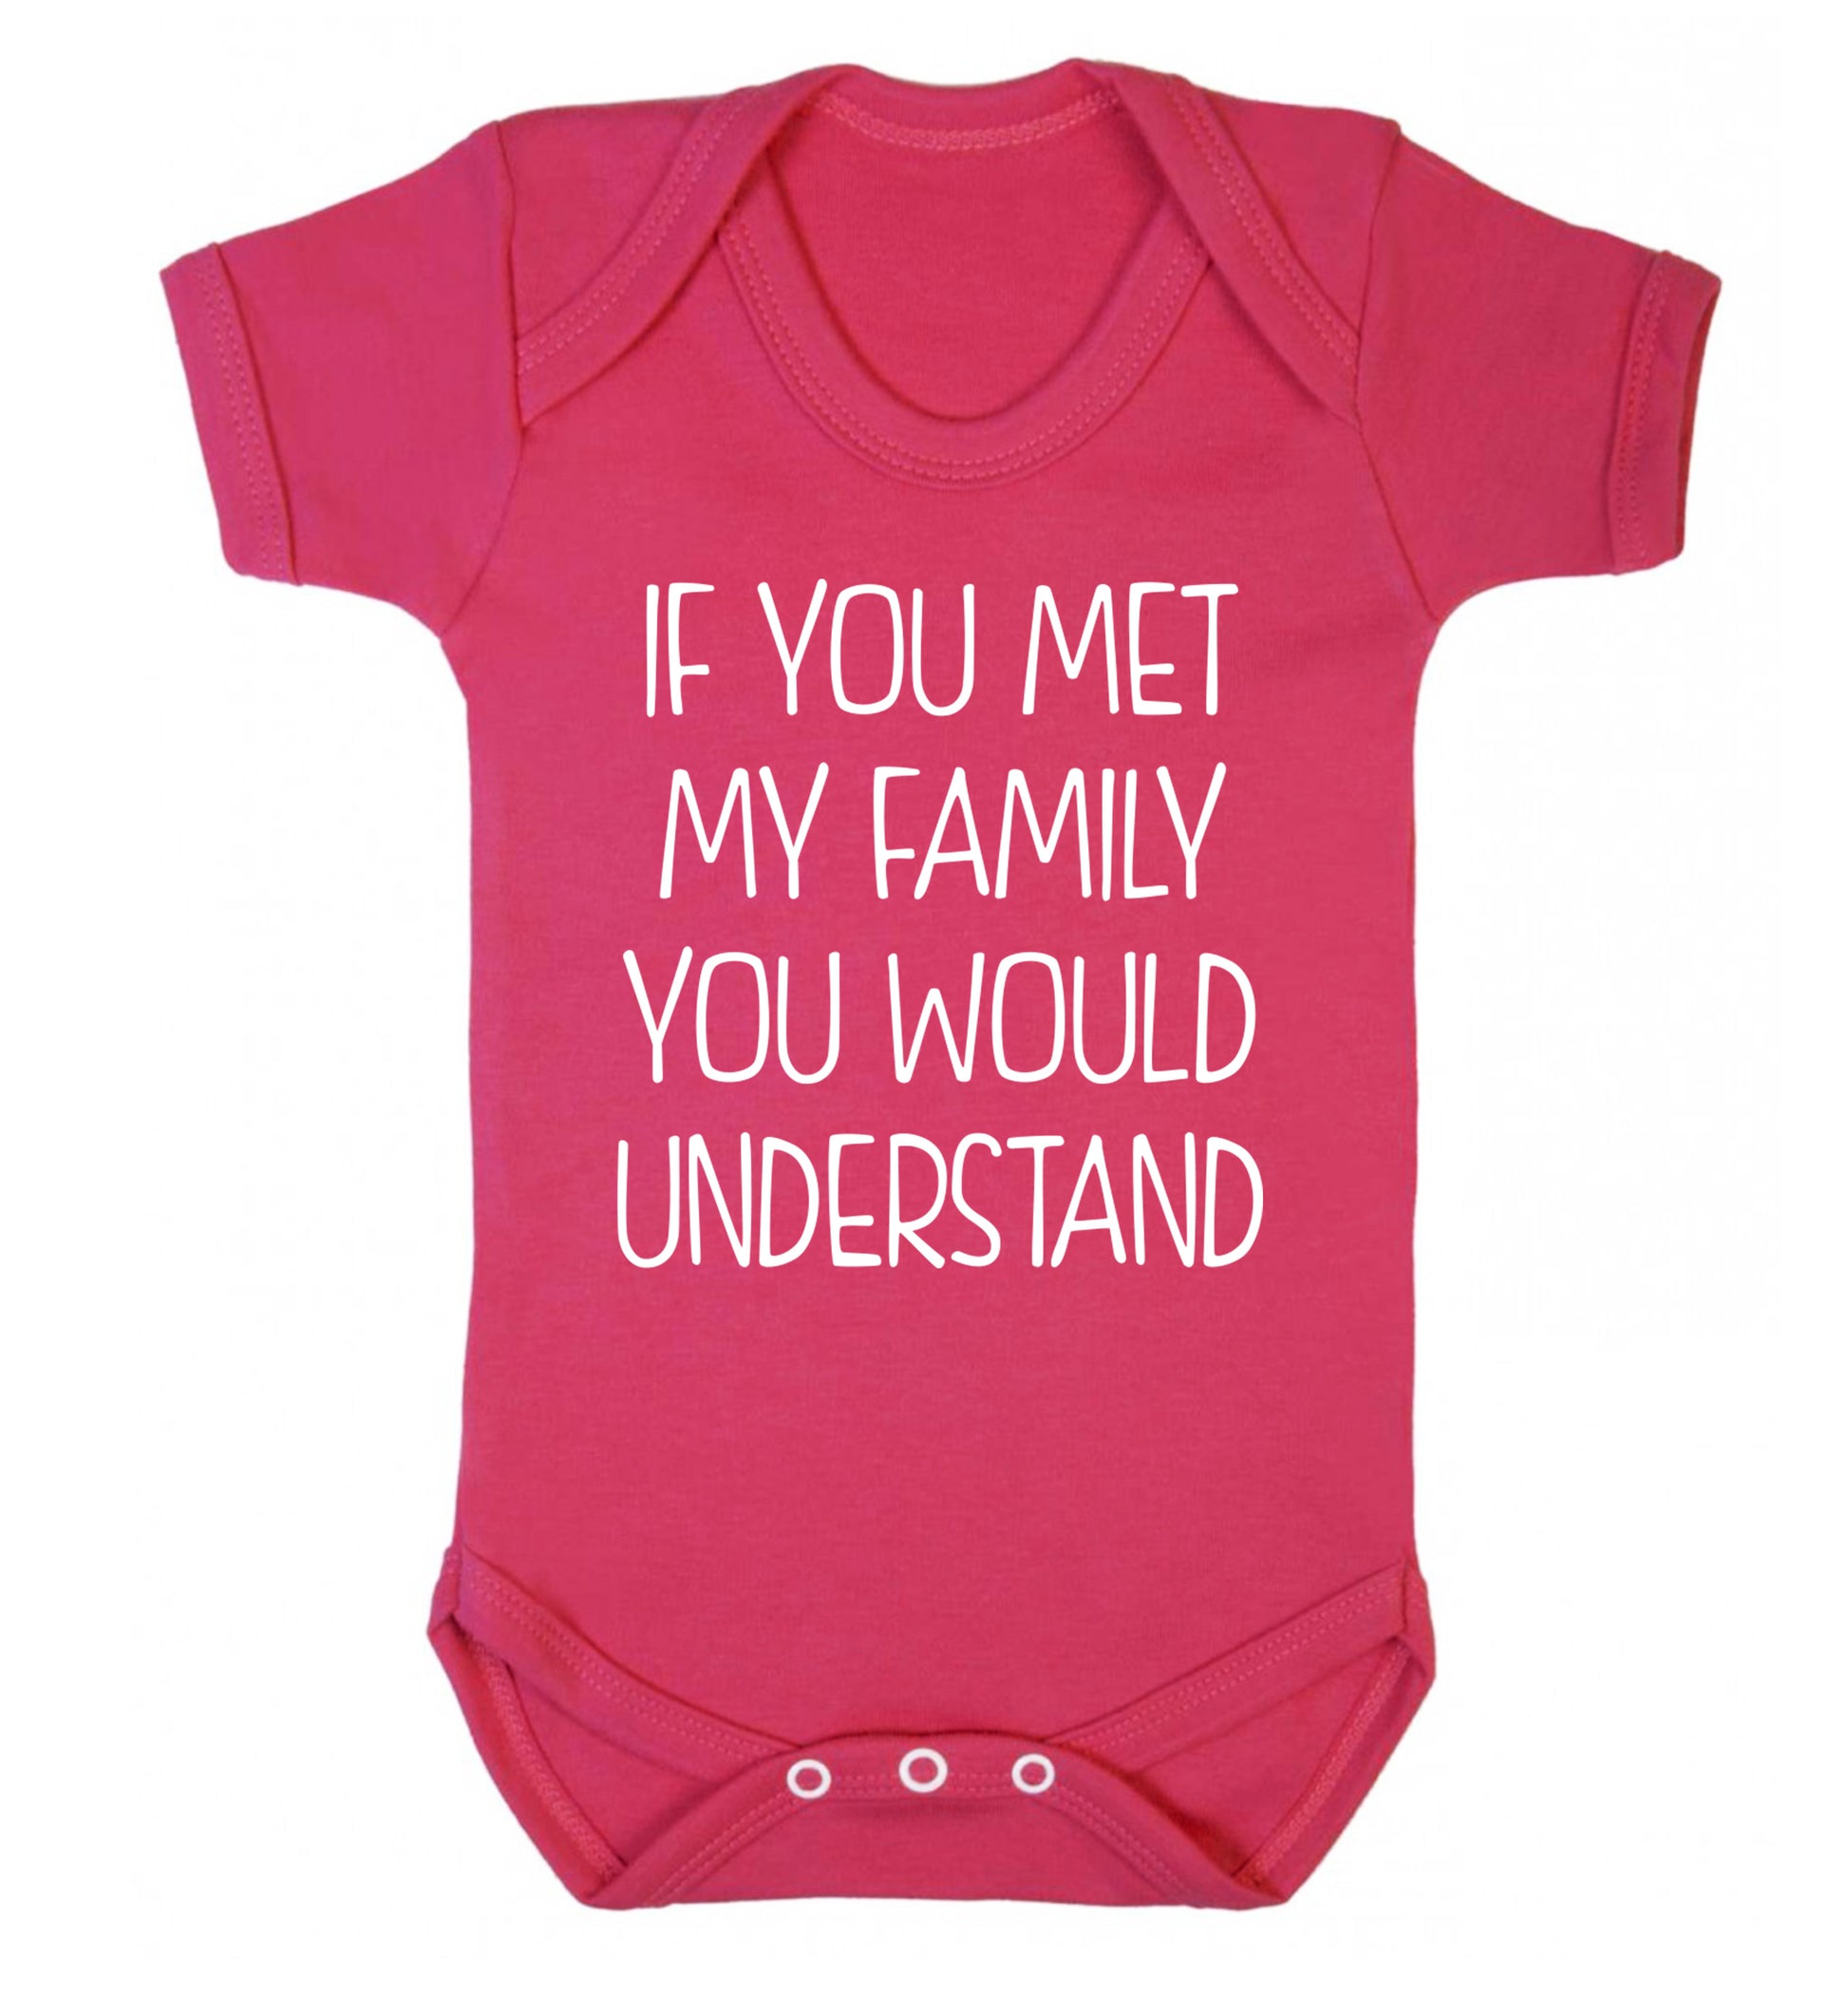 If you met my family you would understand Baby Vest dark pink 18-24 months